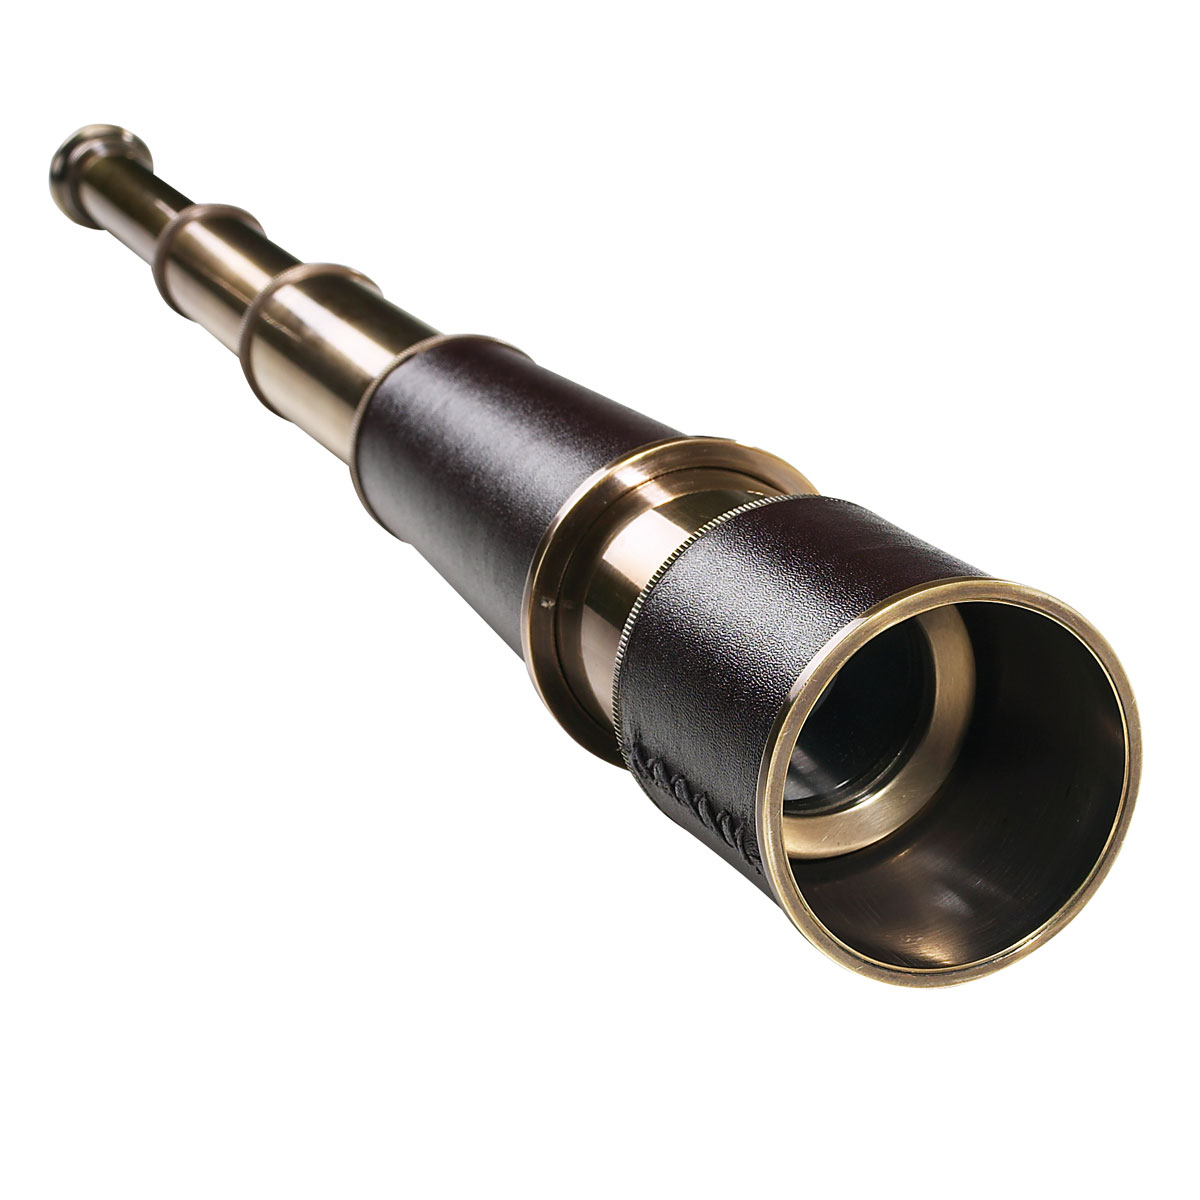 Details about   Lot of 5 Pcs Brass Reproduction Spyglass/Brass Leather Wrapped Telescope Gift 